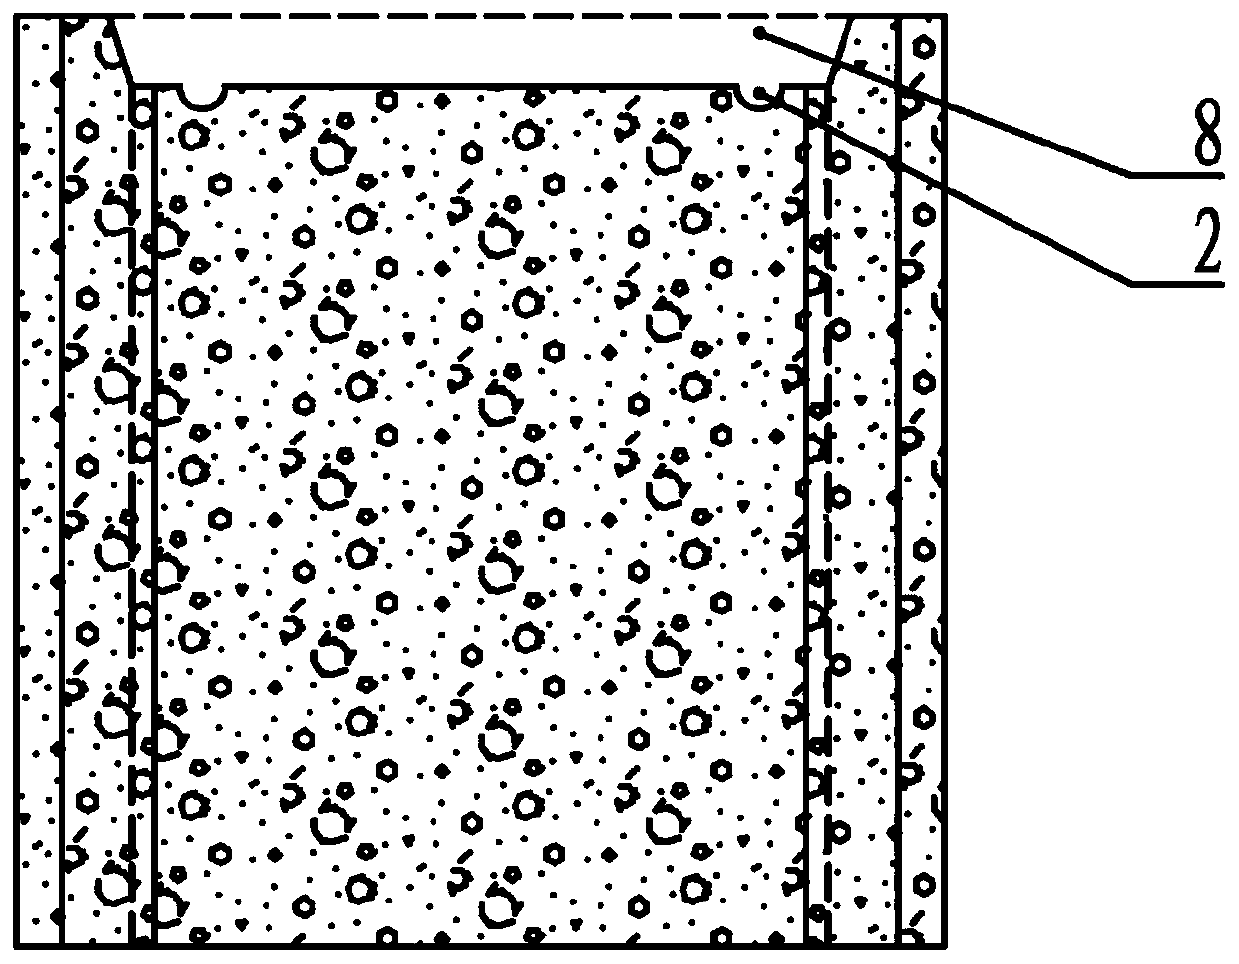 Construction technology for grouting type building blocks with aligned seams and assembled vertical holes